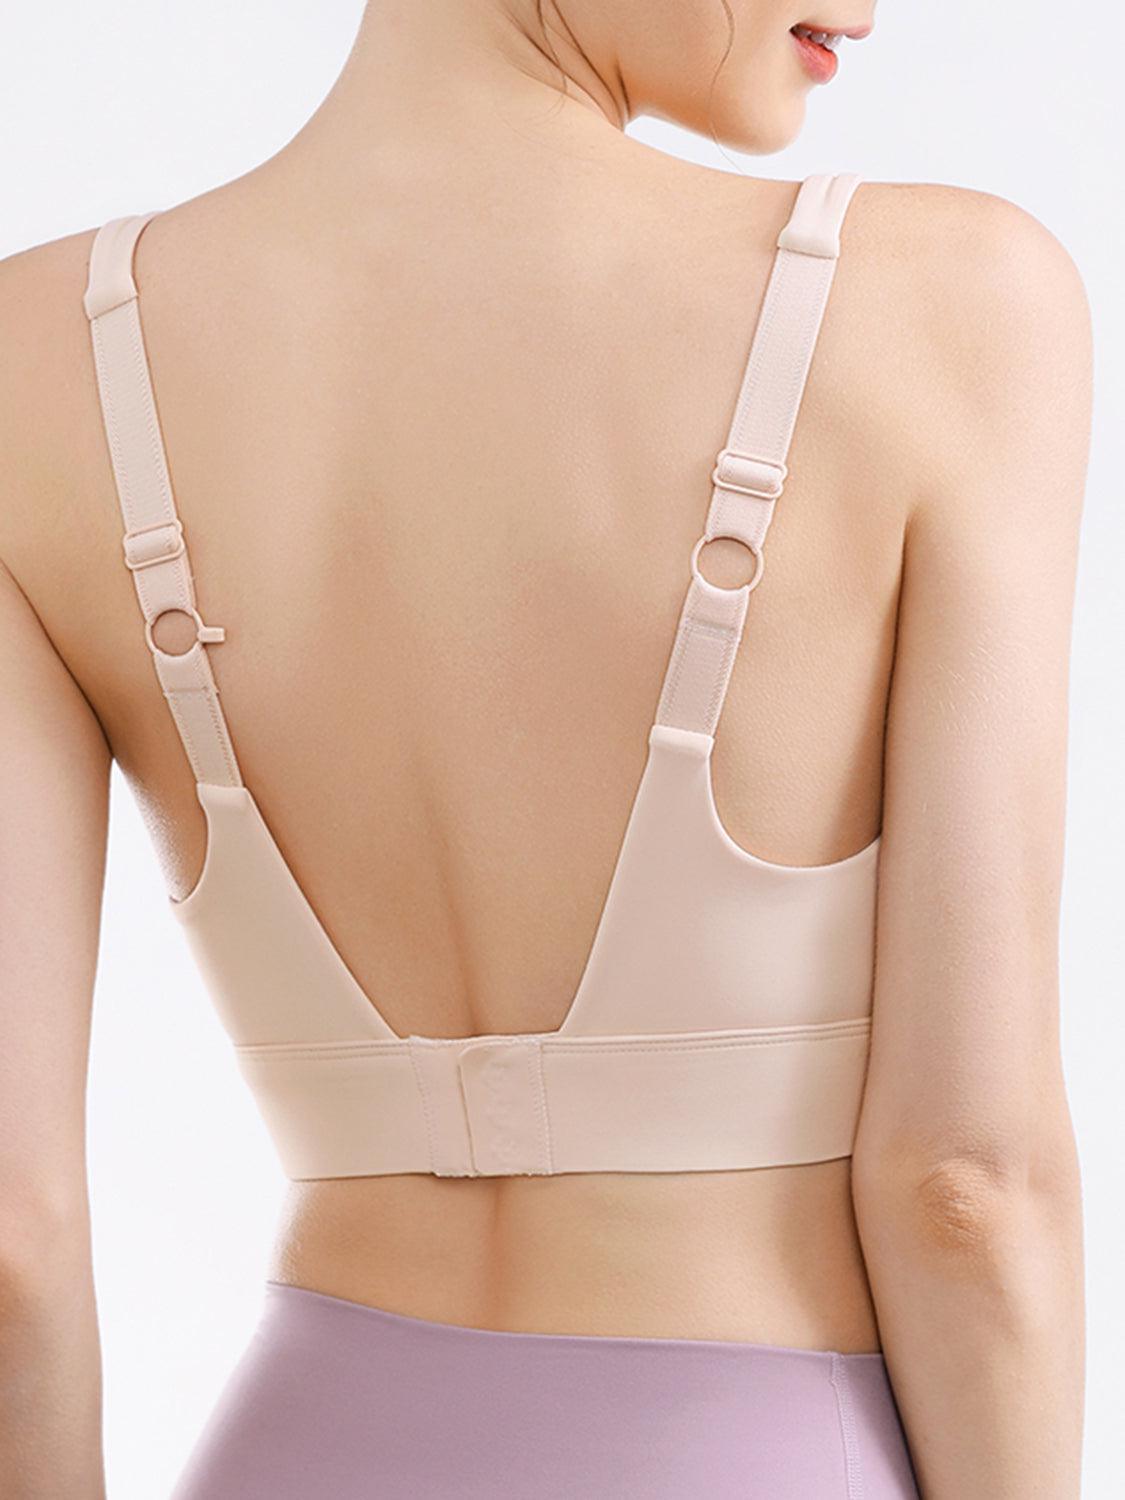 a woman wearing a bra with straps on her back